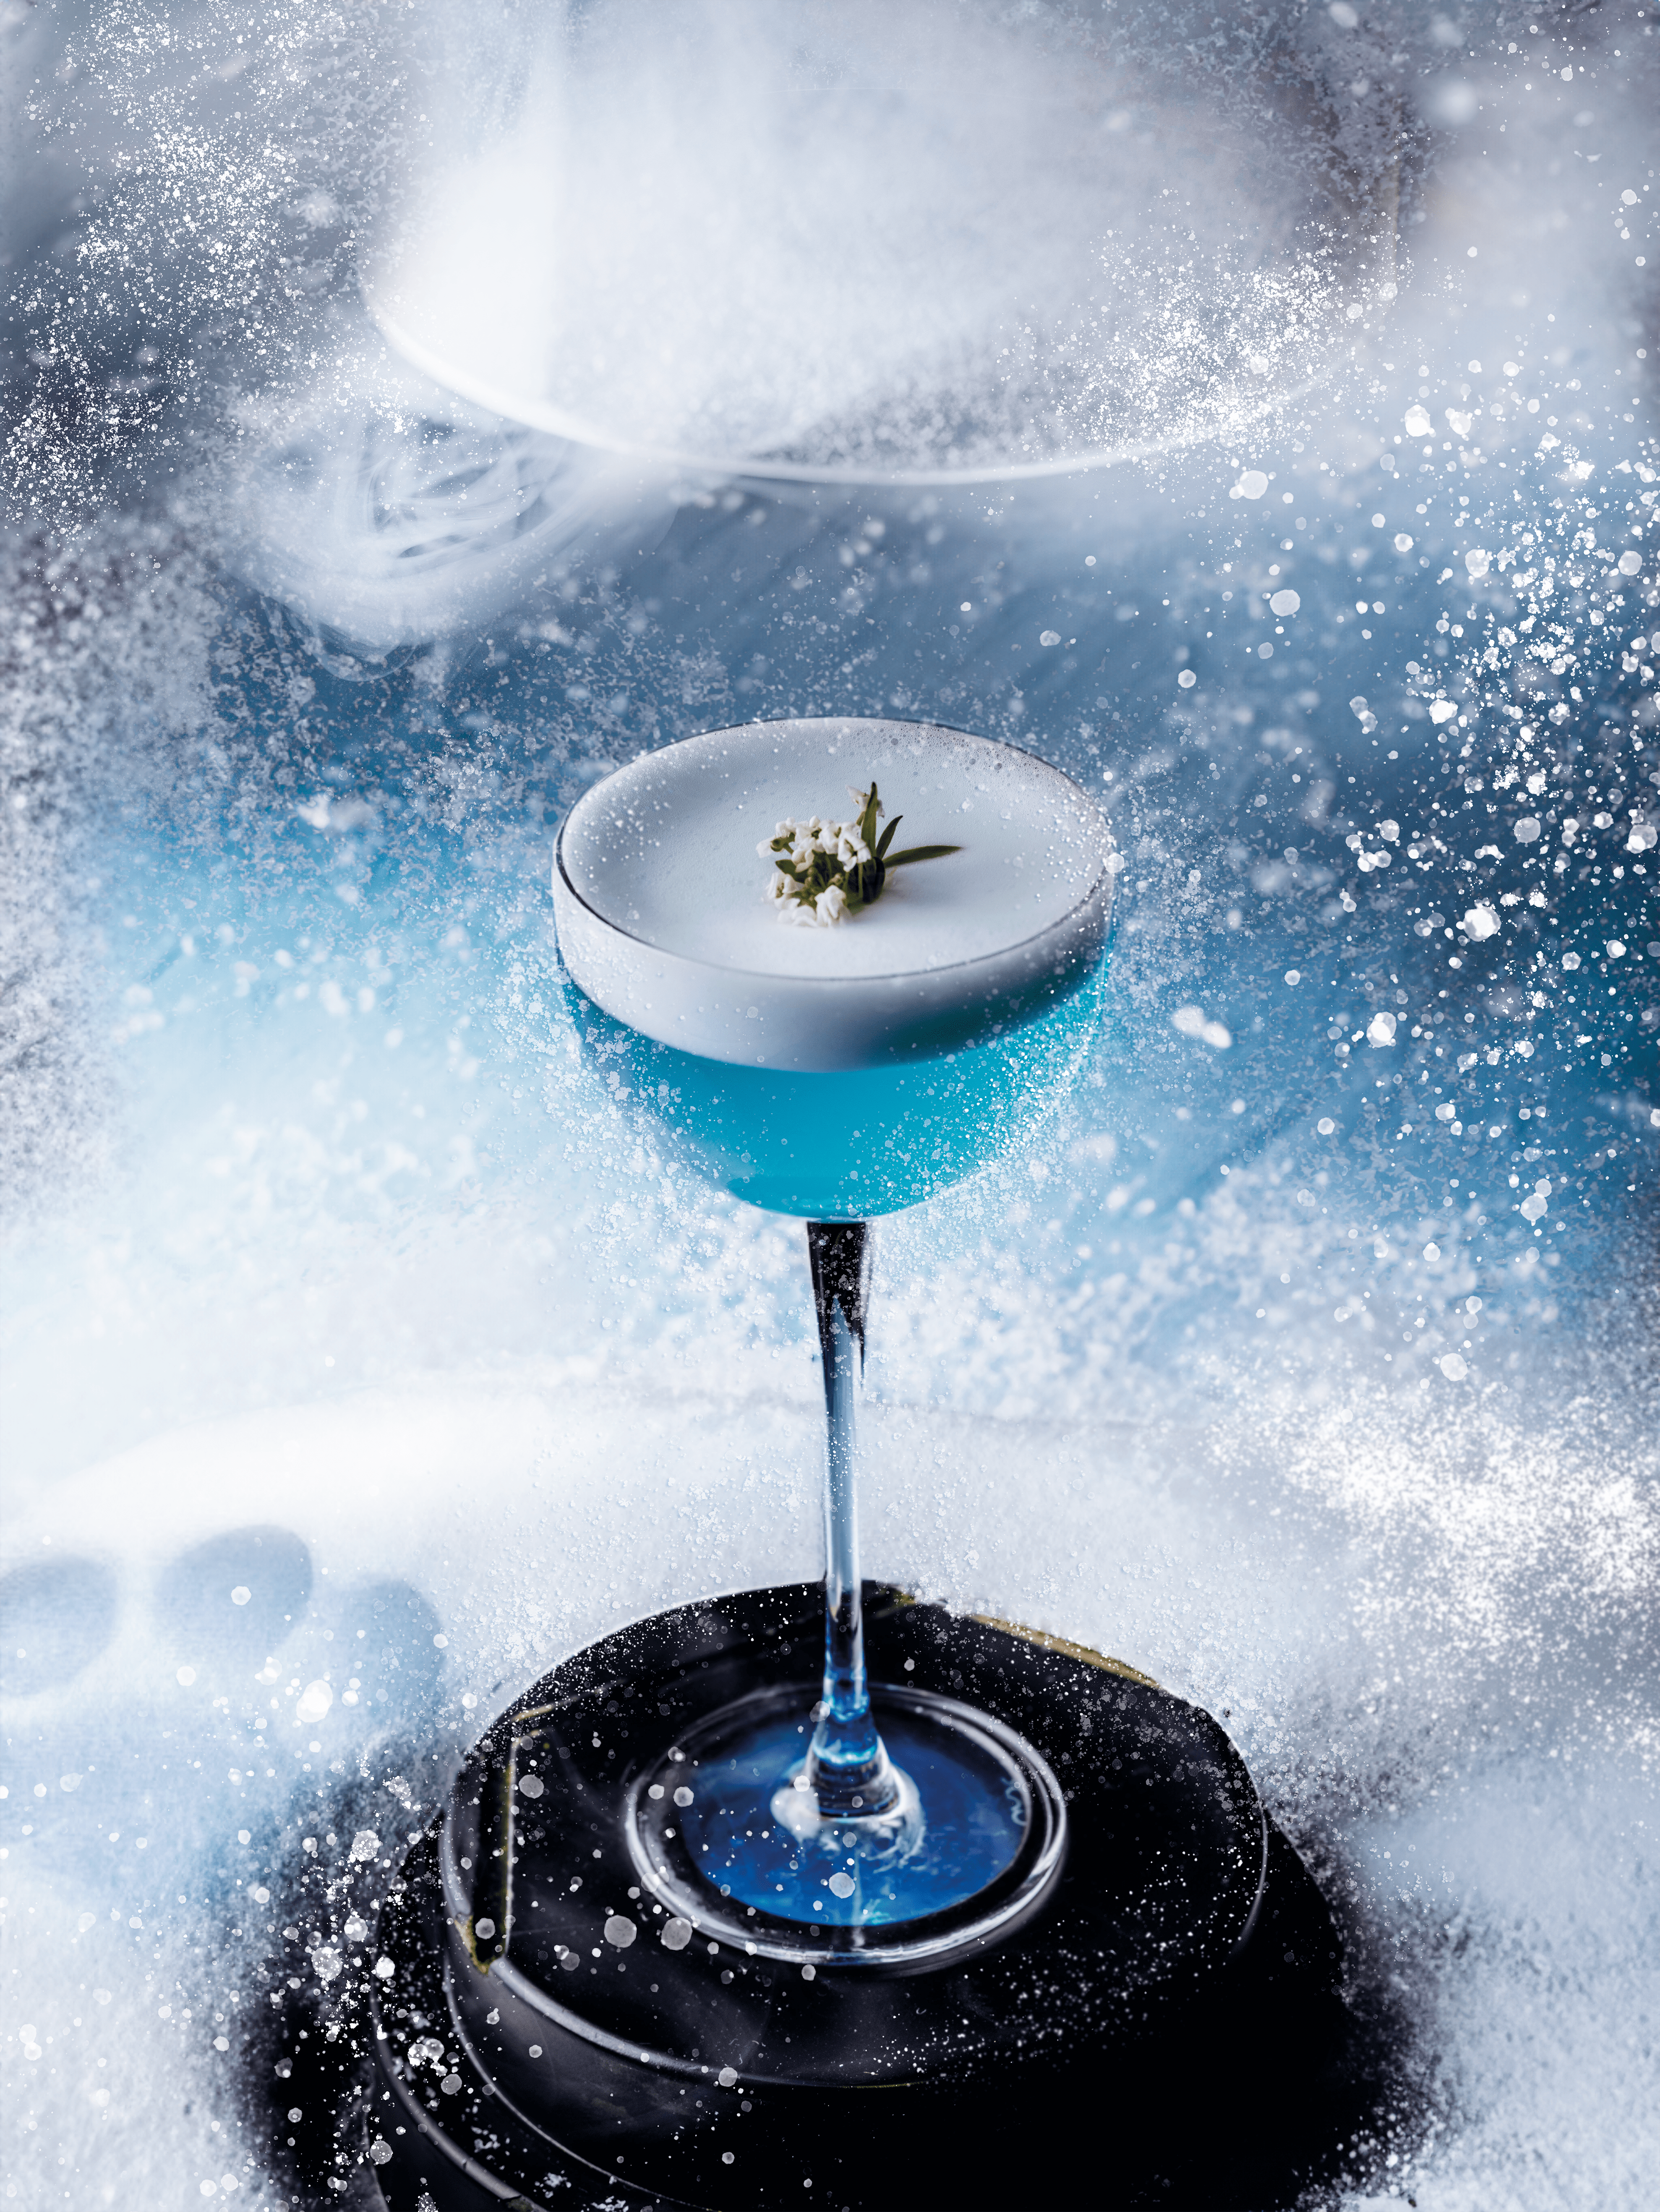 The Great Snow cocktail is part of Tattu's winter menu. Credit: Lateef Photography